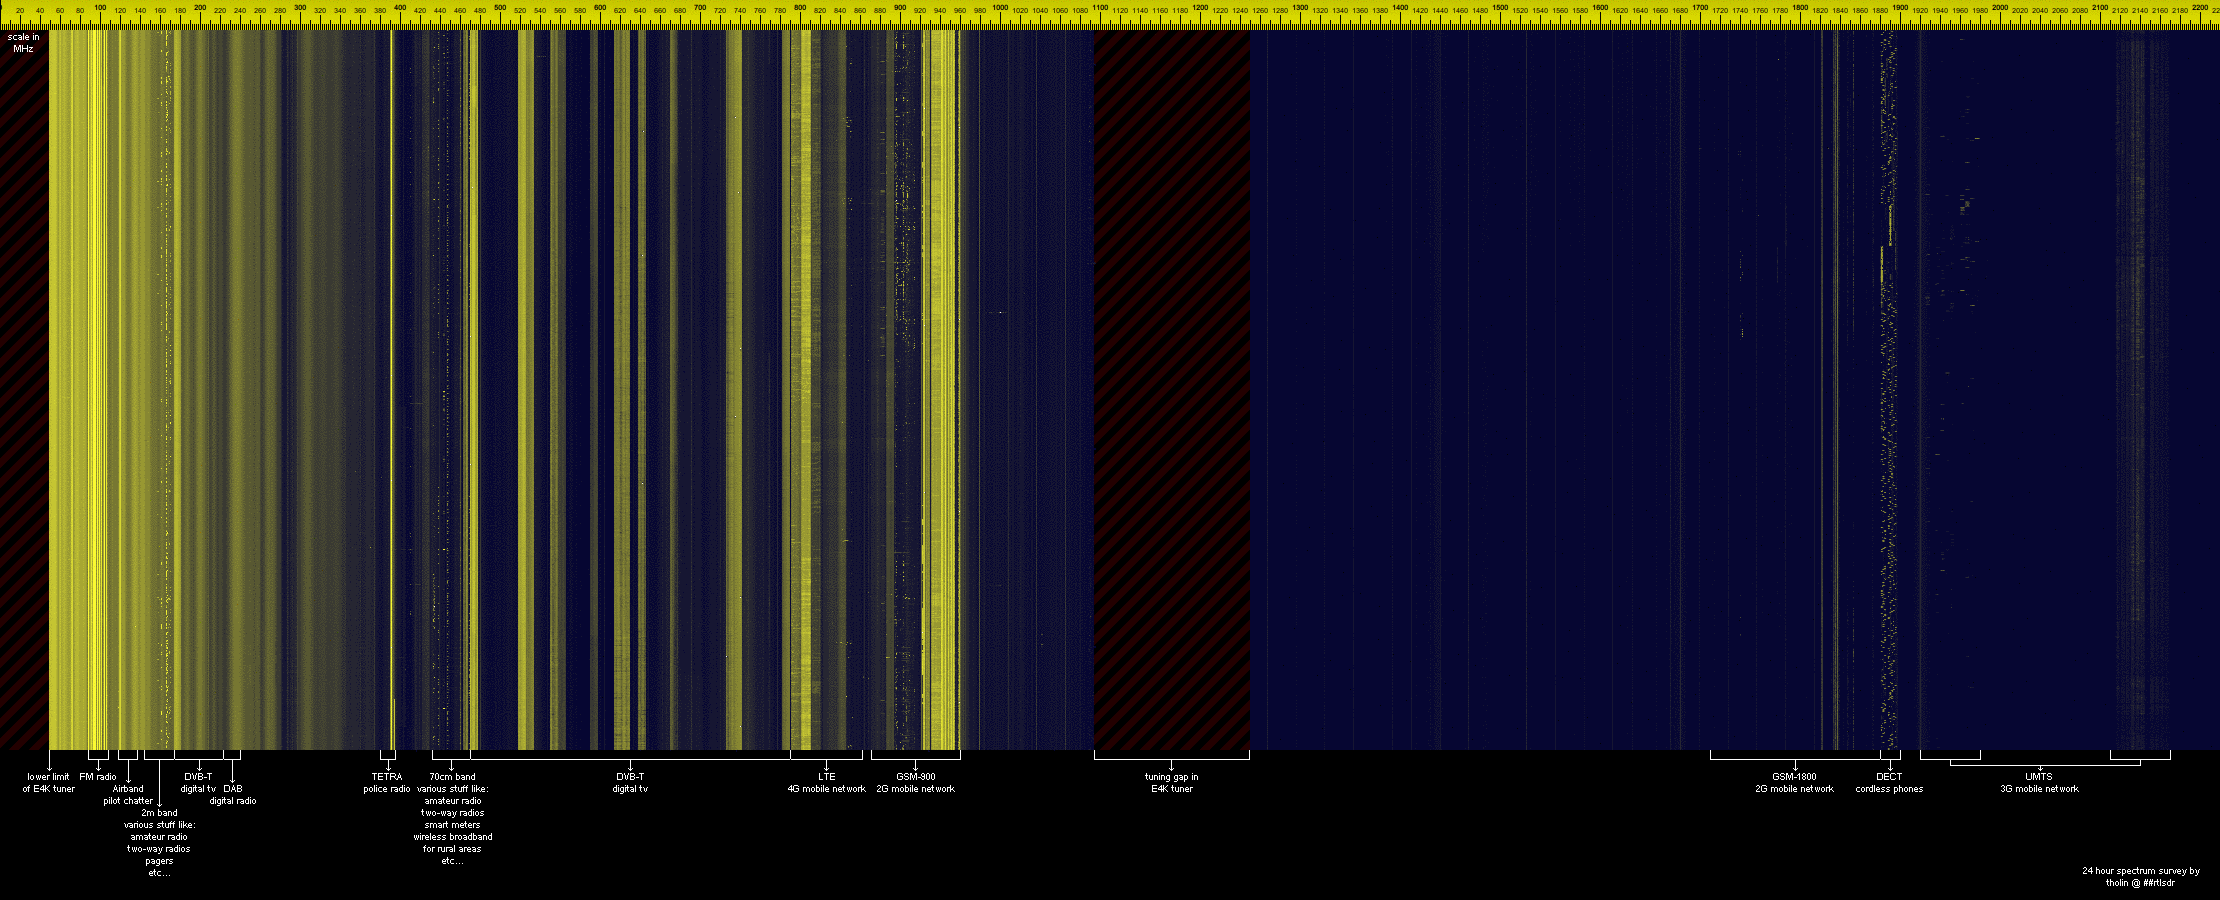 Tholin's RTL-SDR 24-hour scan